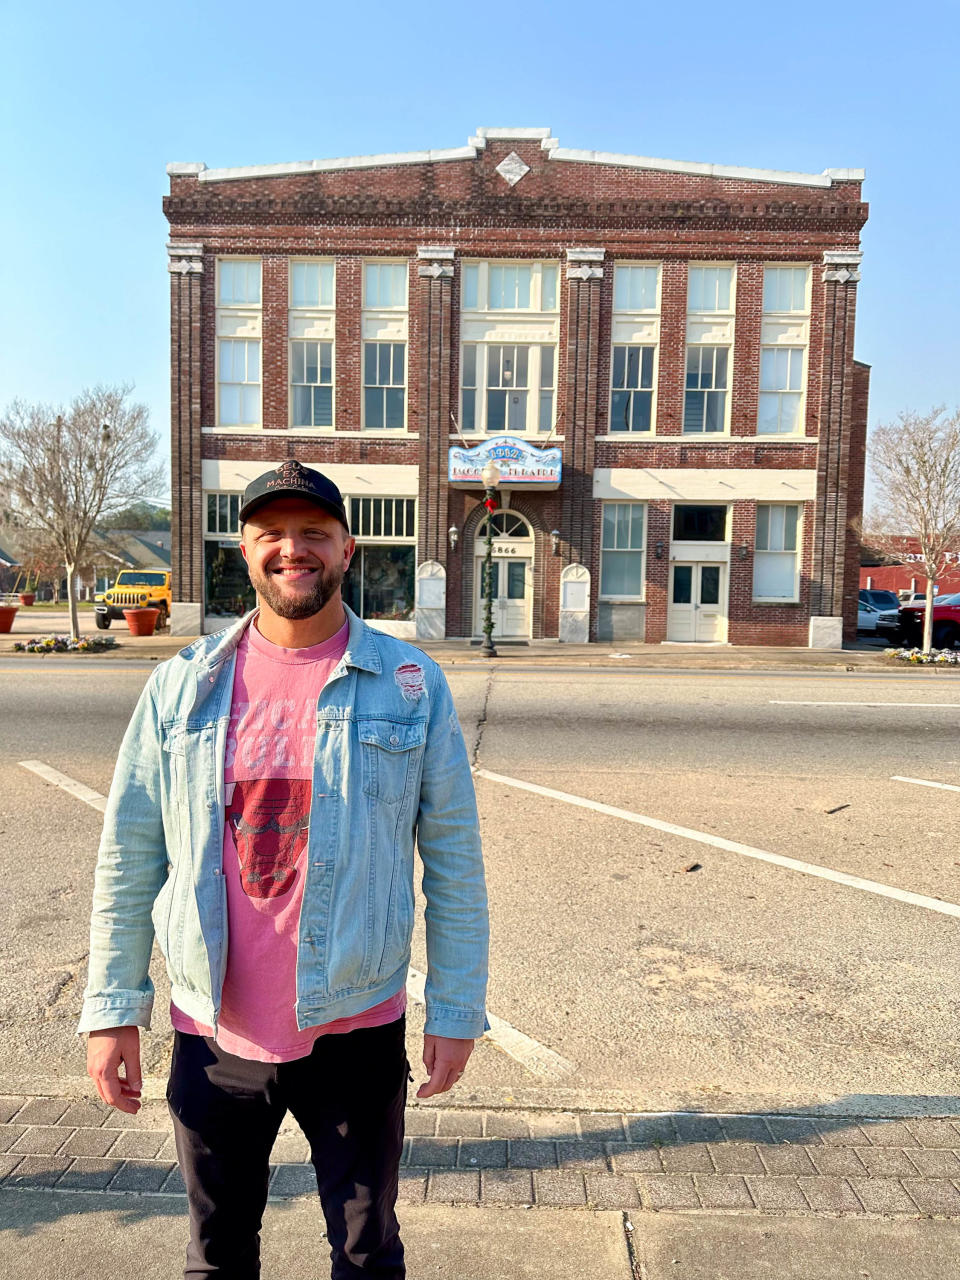 Josh Lipscomb, a lead pastor at Liberty Church, stands in front of the 111-year-old Imogene Theatre in downtown Milton on Tuesday, Dec. 19, 2023. The church has purchased the building from the Santa Rosa Historical Society in what is being touted as a winning scenario for all involved.